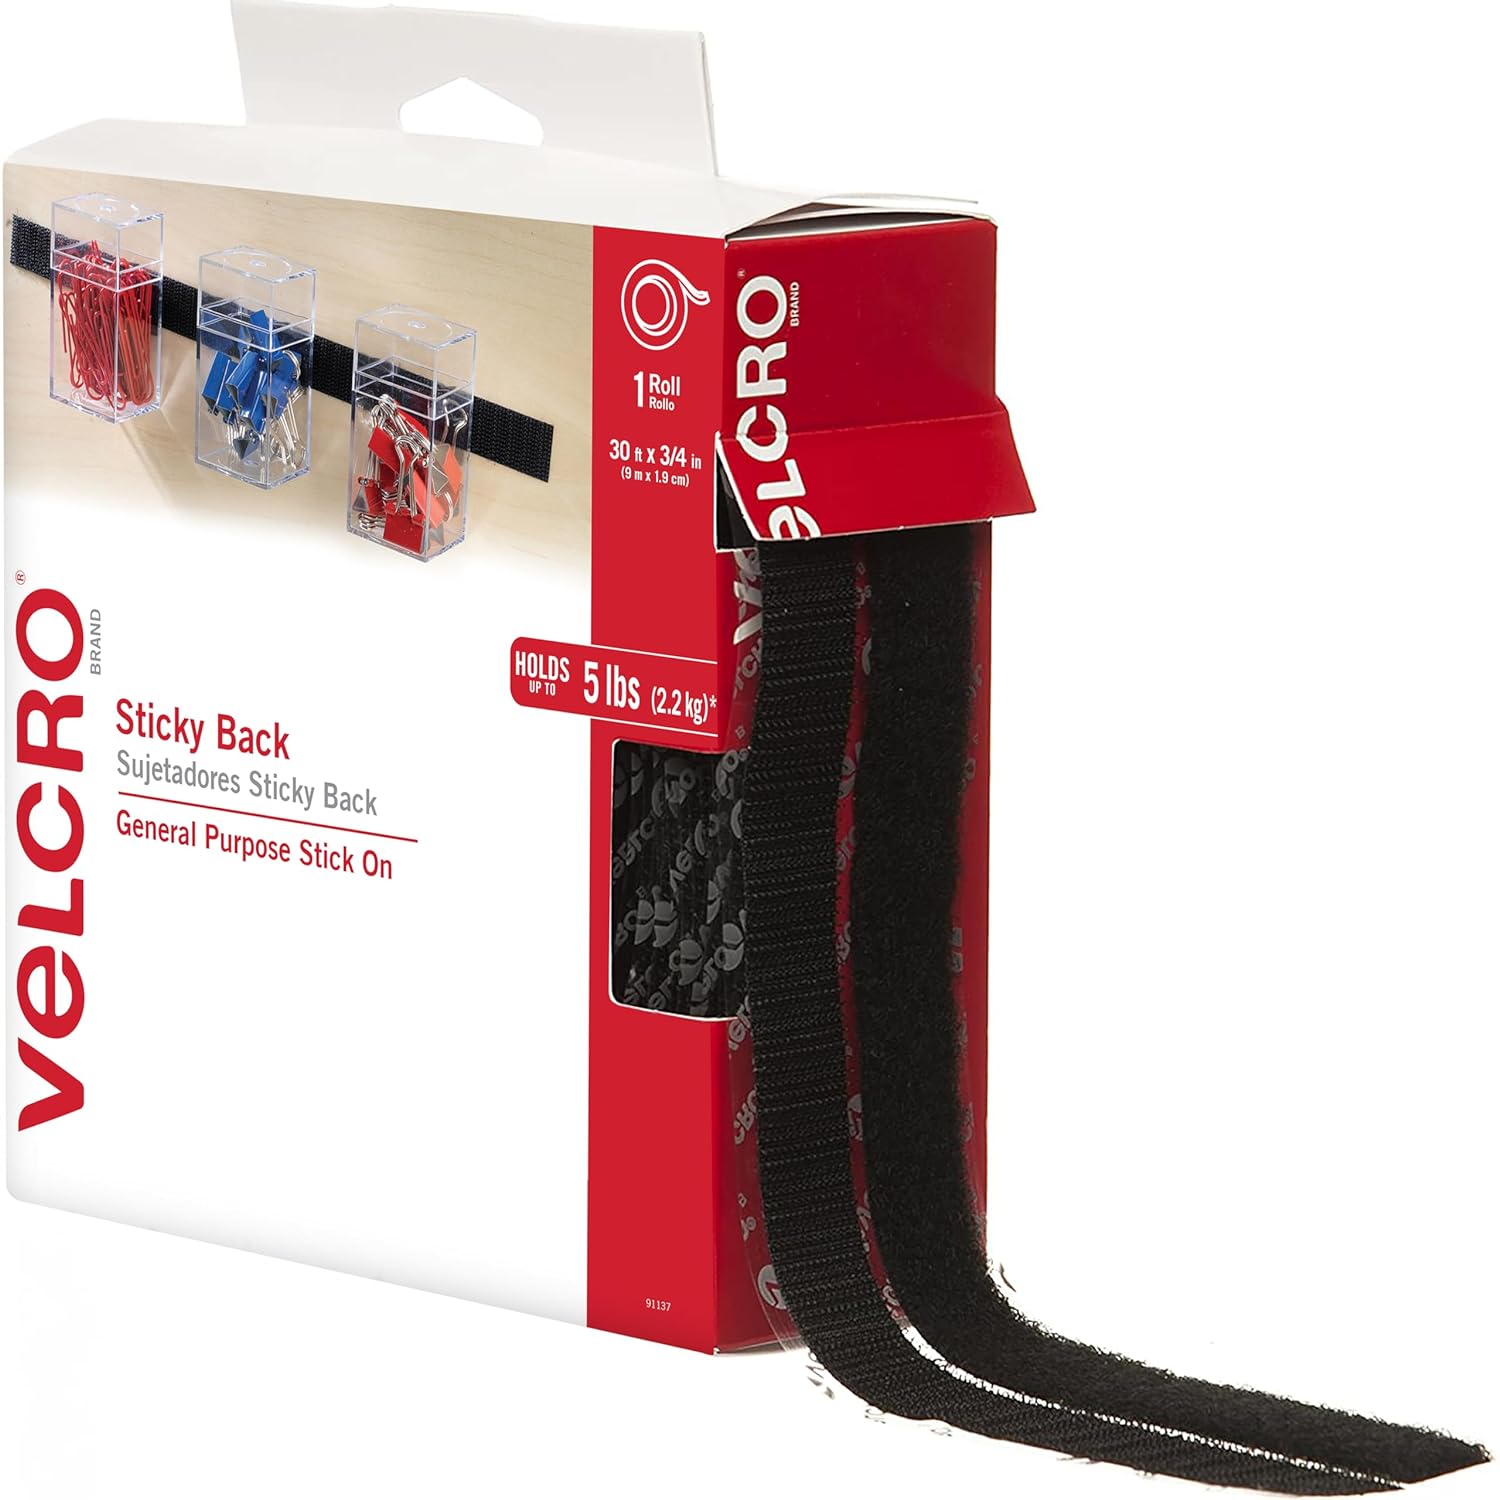 30 ft VELCRO Sticky Back 3/4" Wide Cut-to-Length Adhesive Tape Roll $5.87